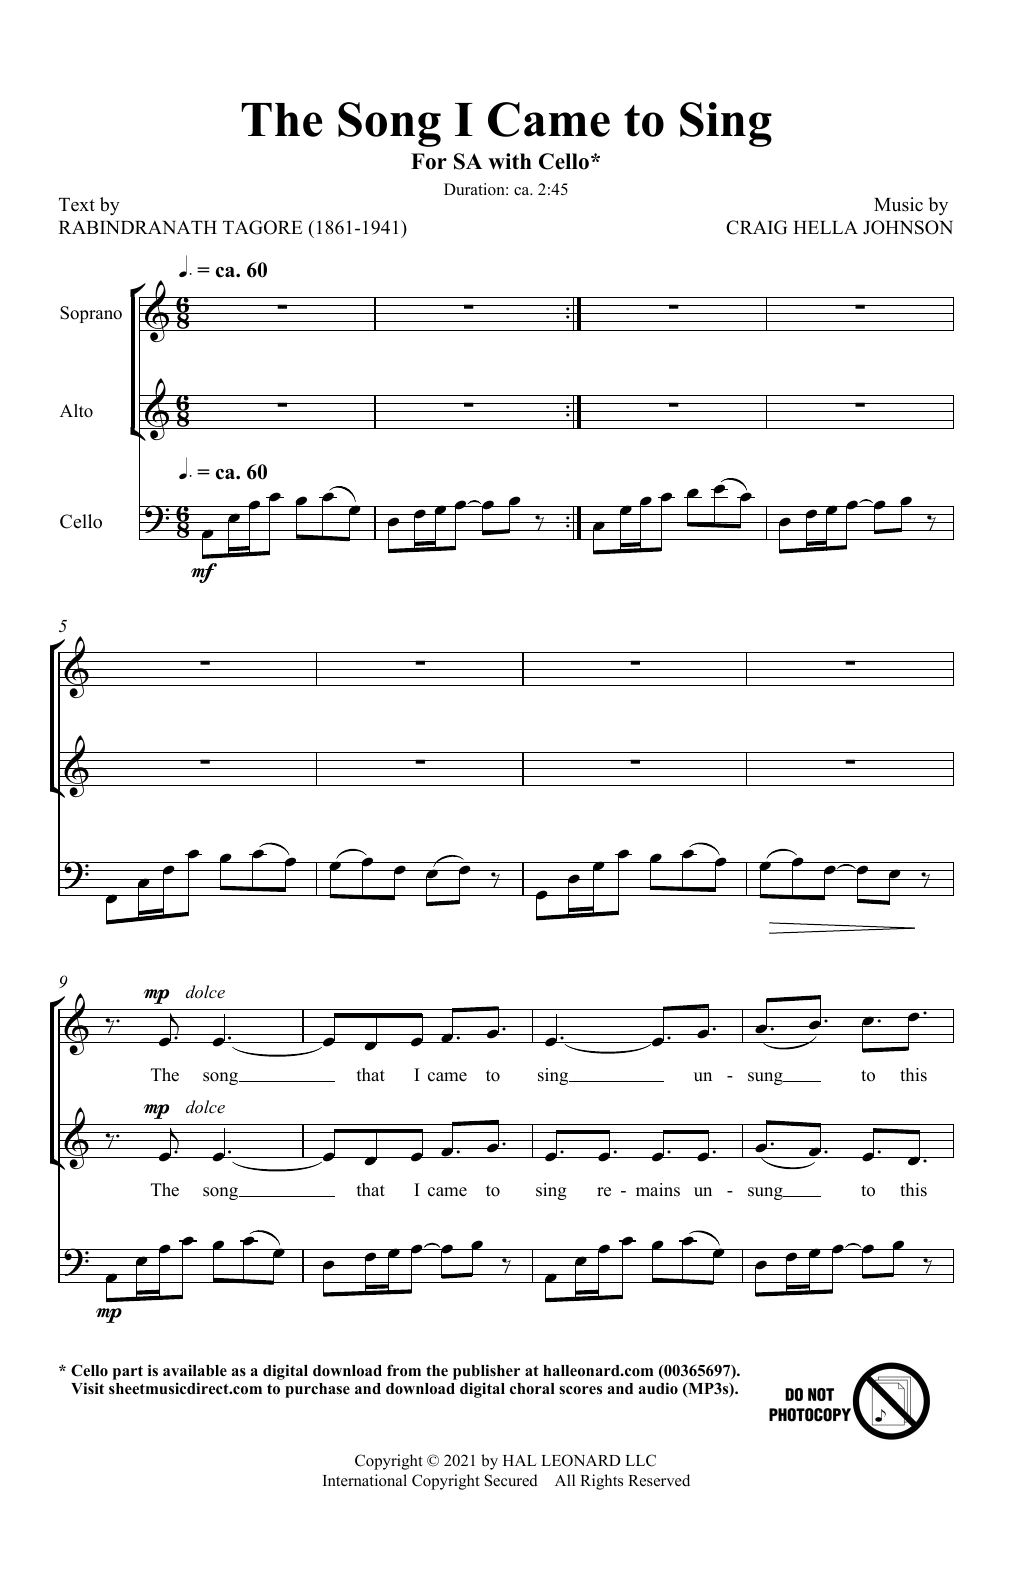 Download Craig Hella Johnson The Song I Came To Sing Sheet Music